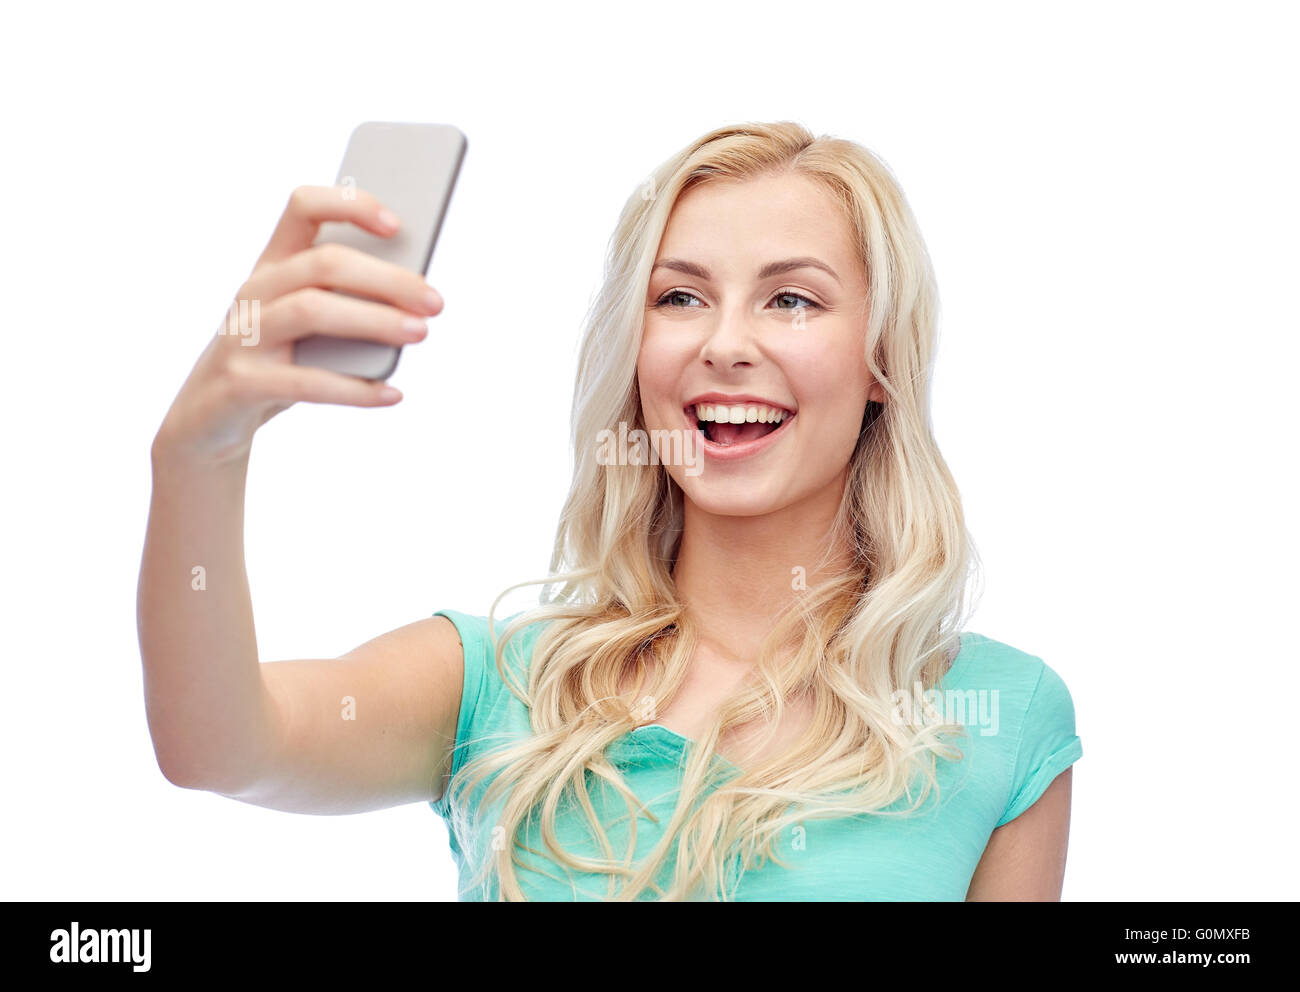 Smiling young woman with smartphone selfies Banque D'Images